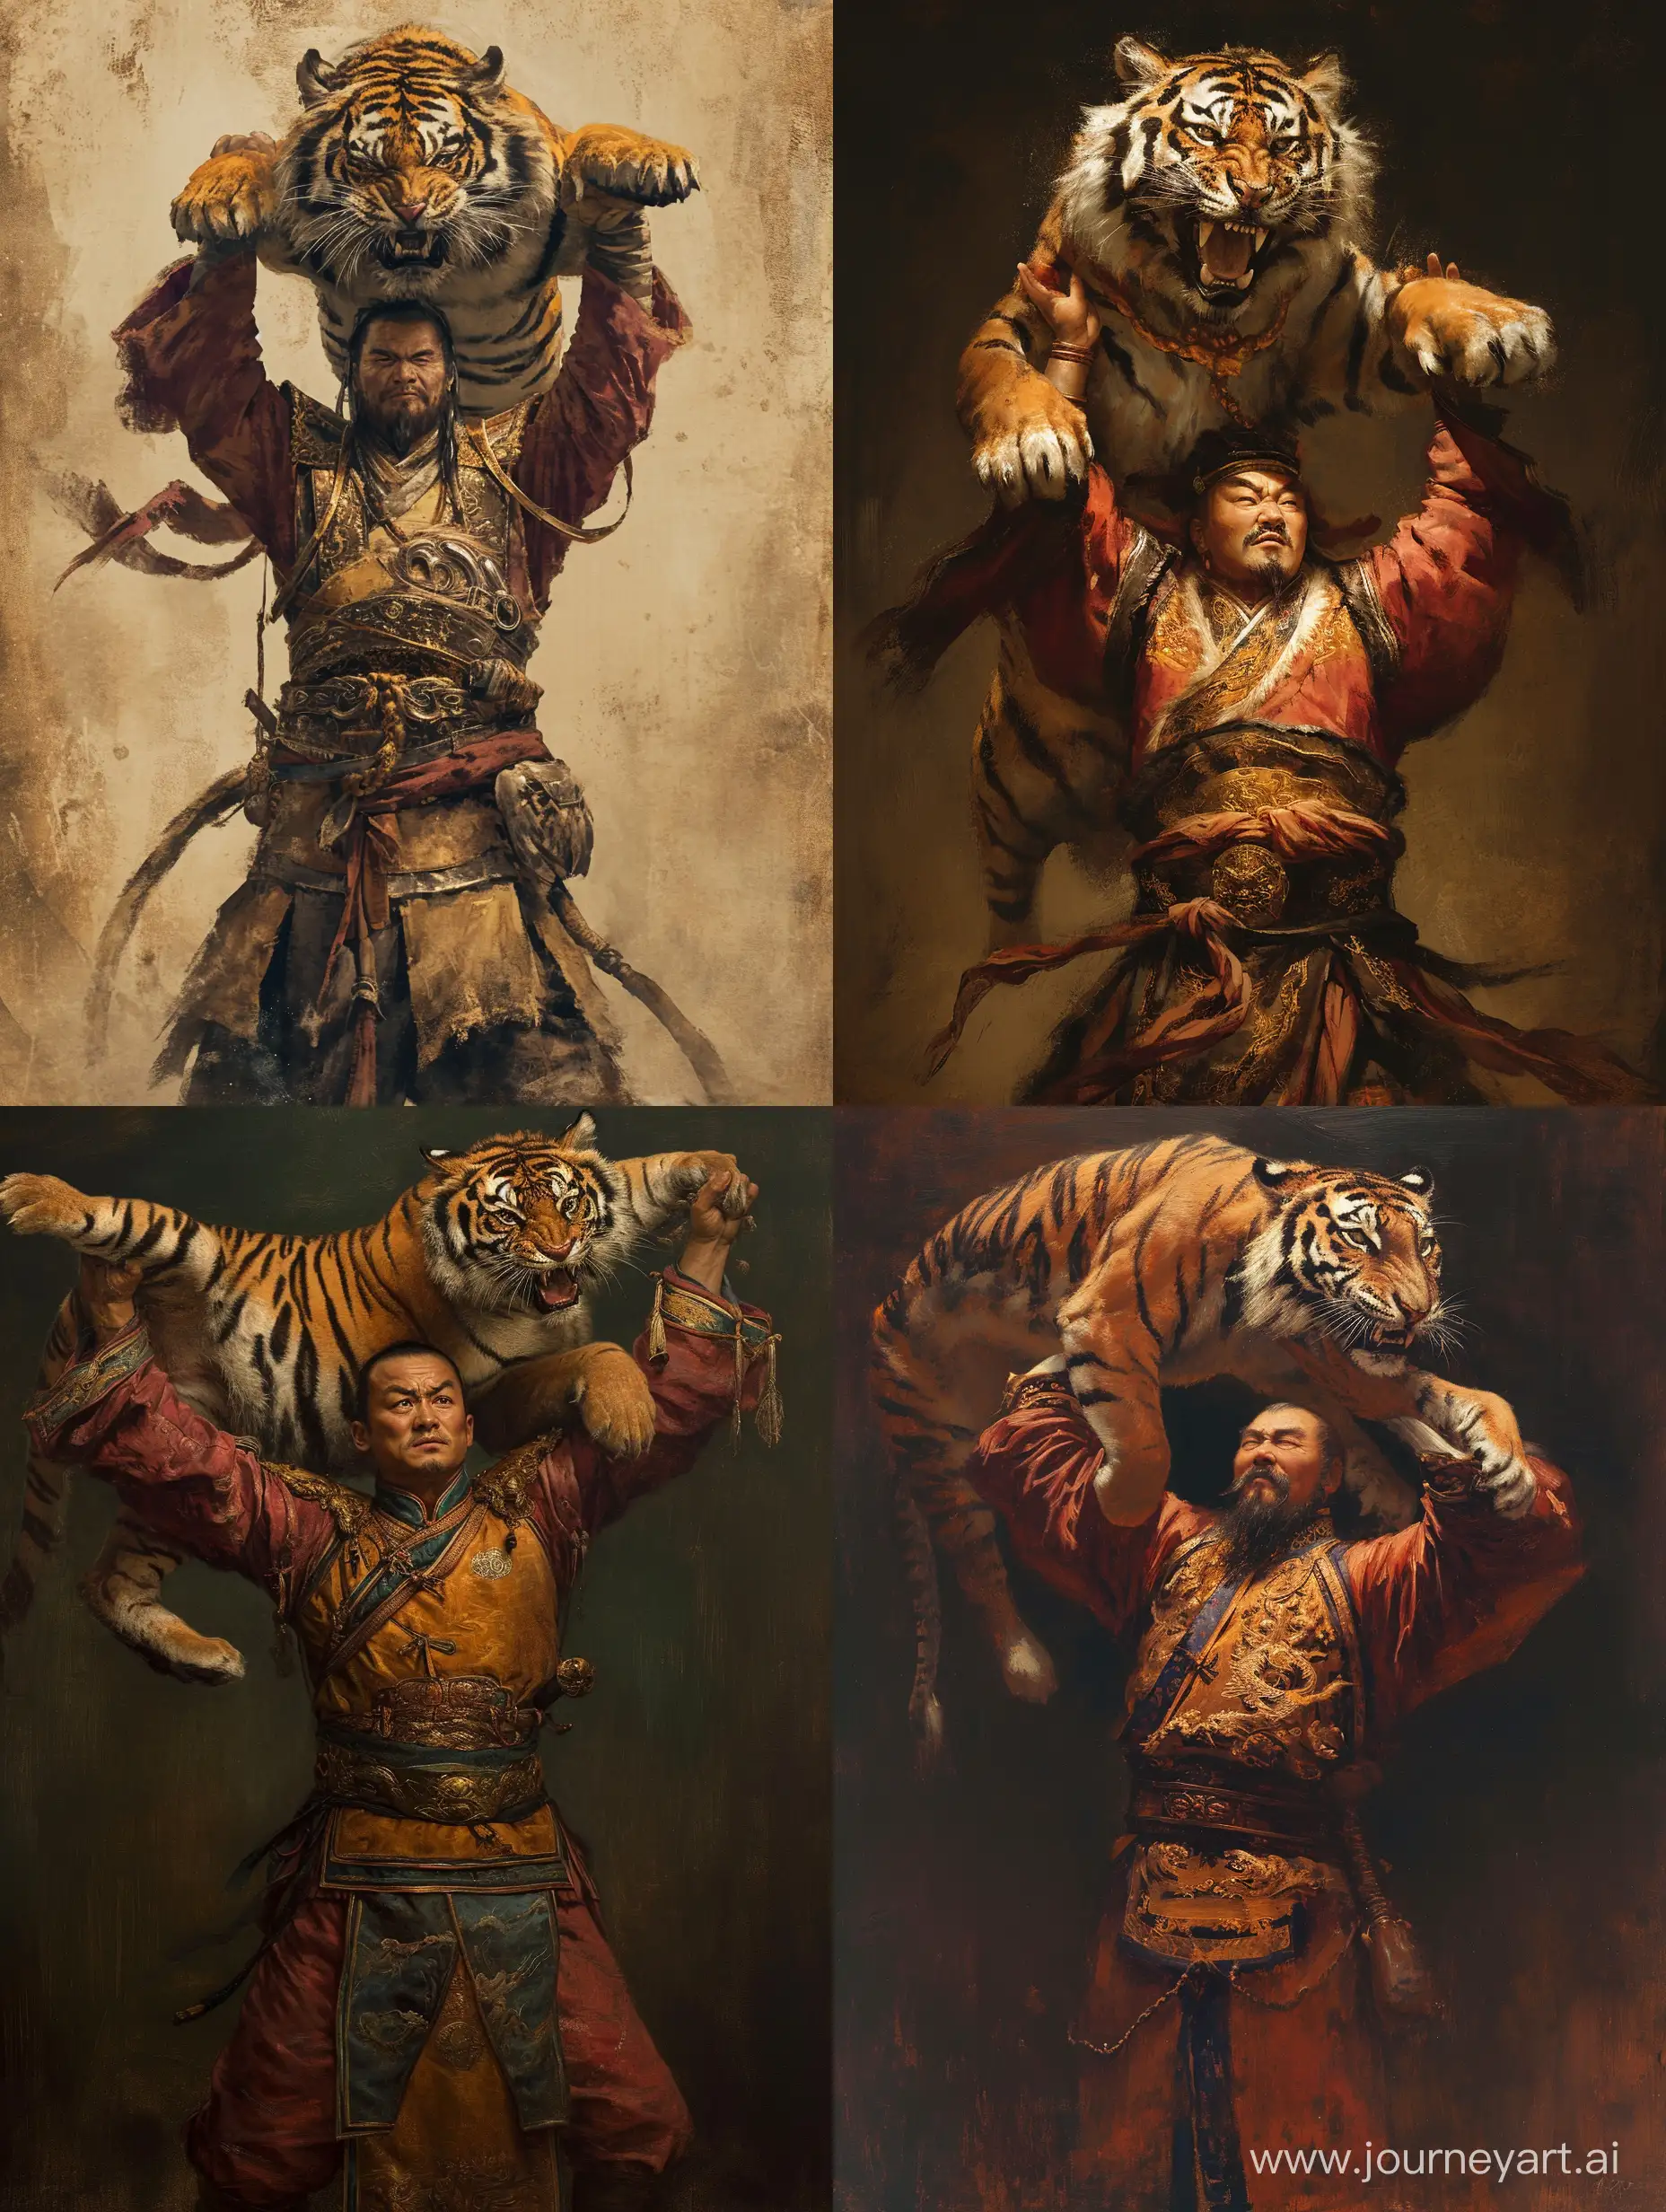 Ancient-Chinese-General-Displaying-Fierce-Tiger-in-Traditional-Painting